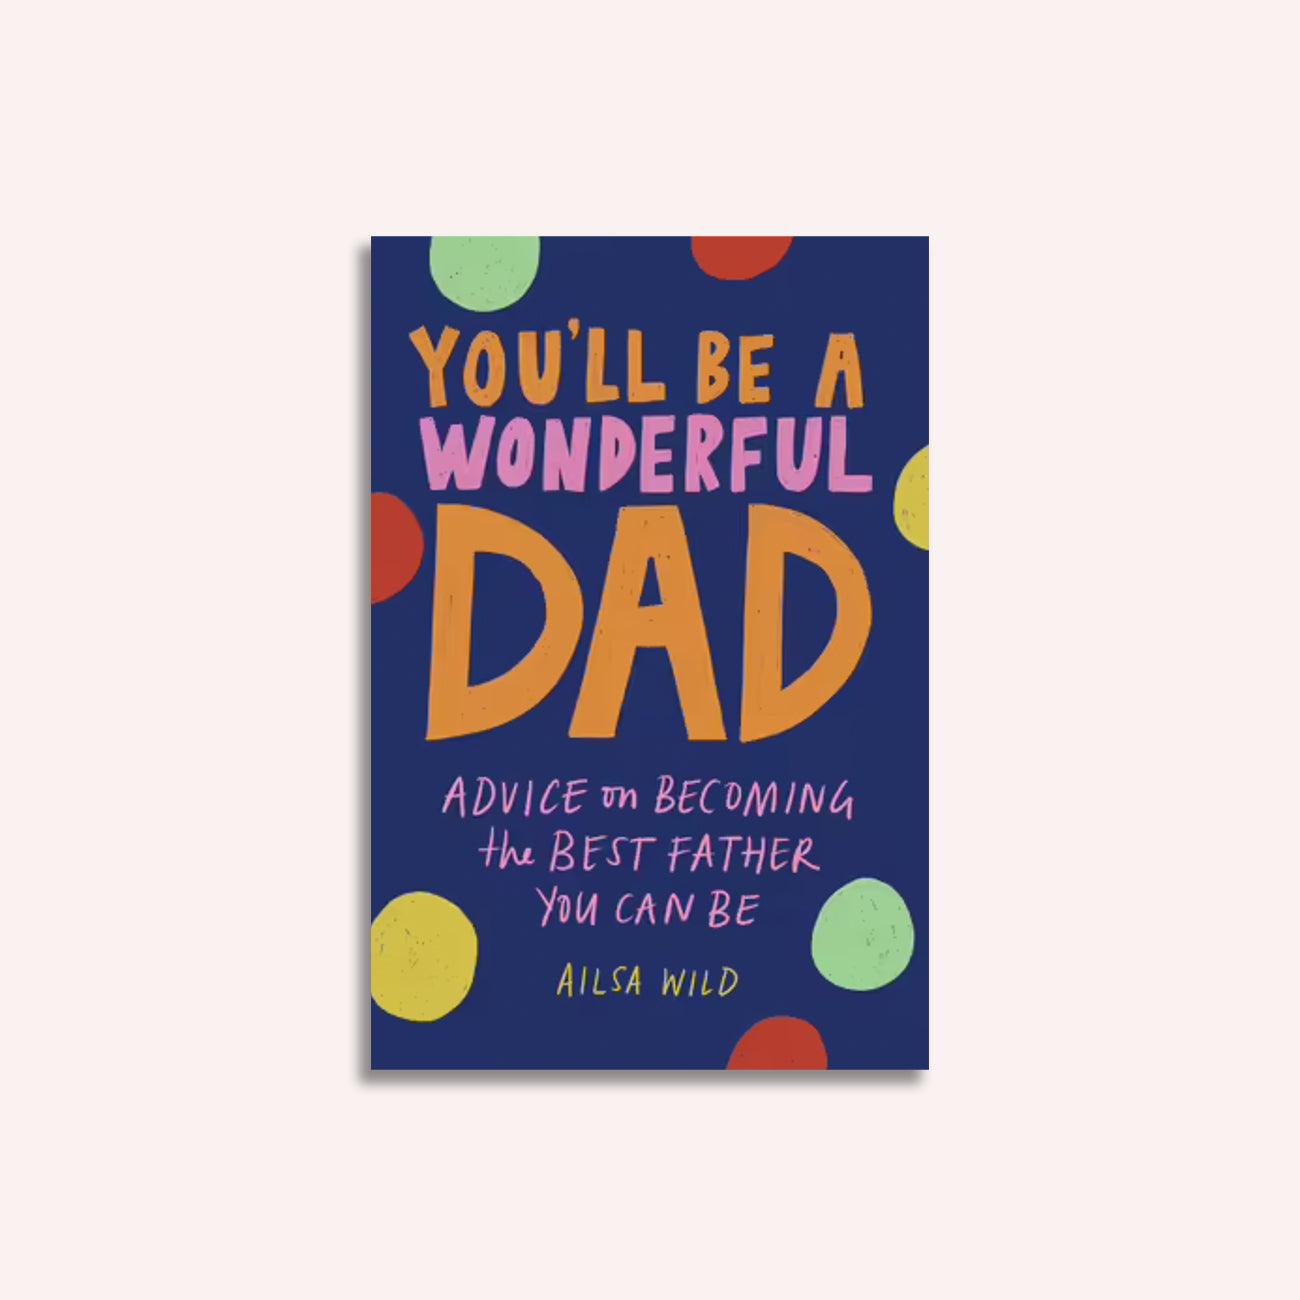 You'll be A Wonderful Dad by Alisa Wild | the memo – The Memo